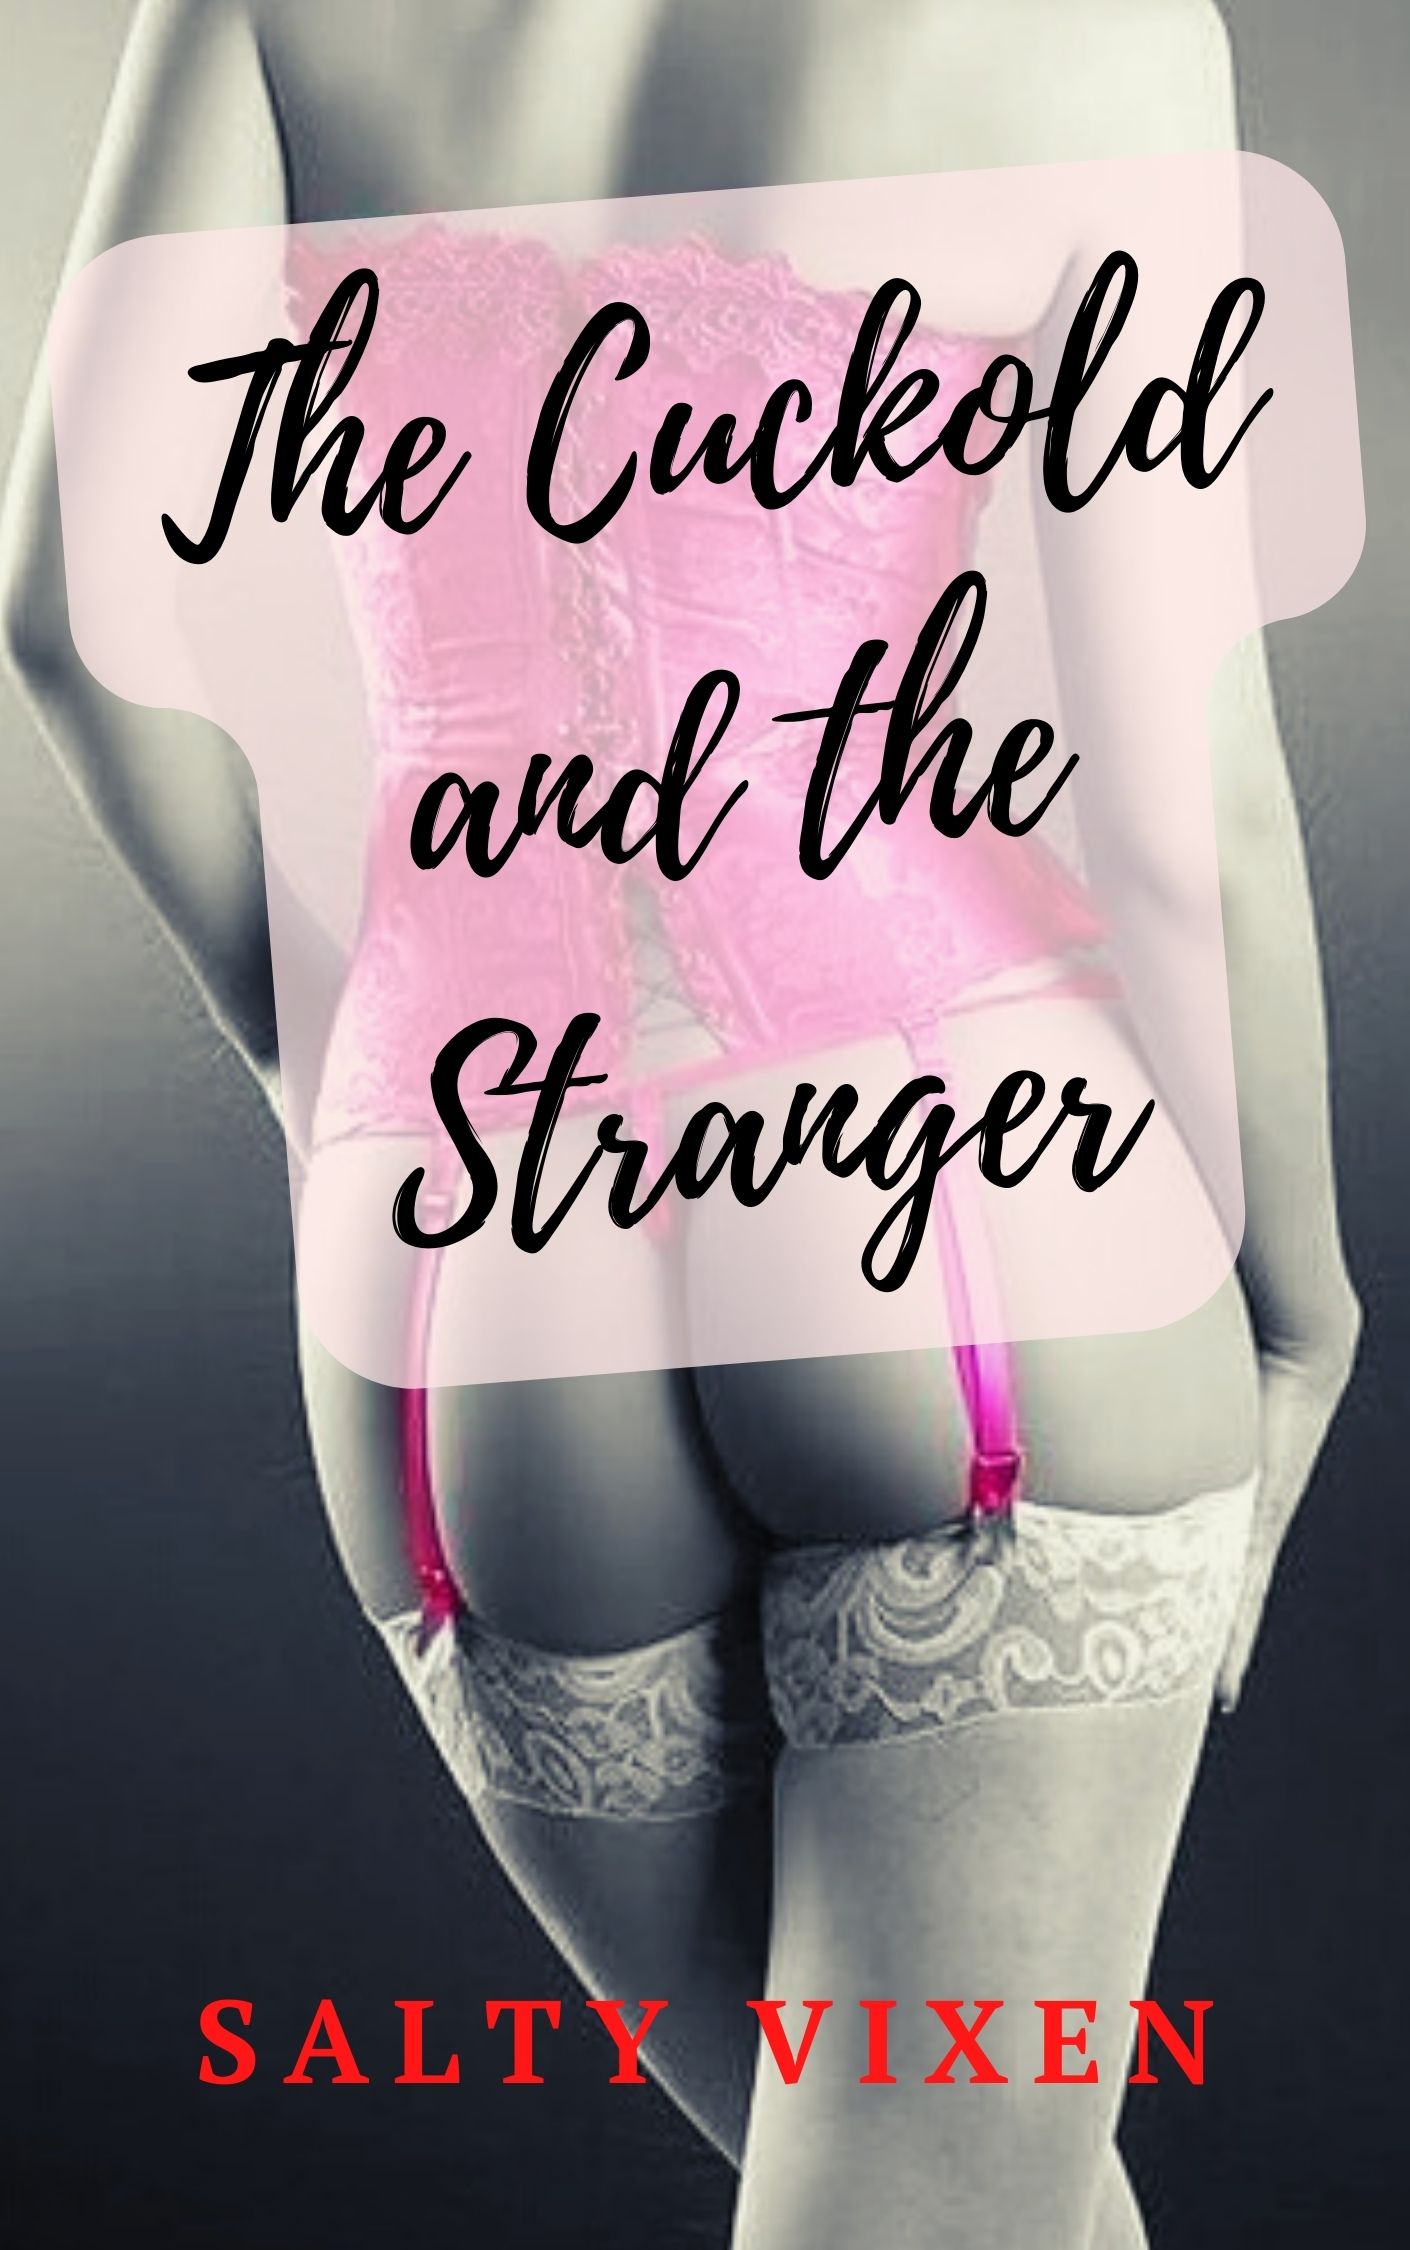 The Cuckold and the Stranger